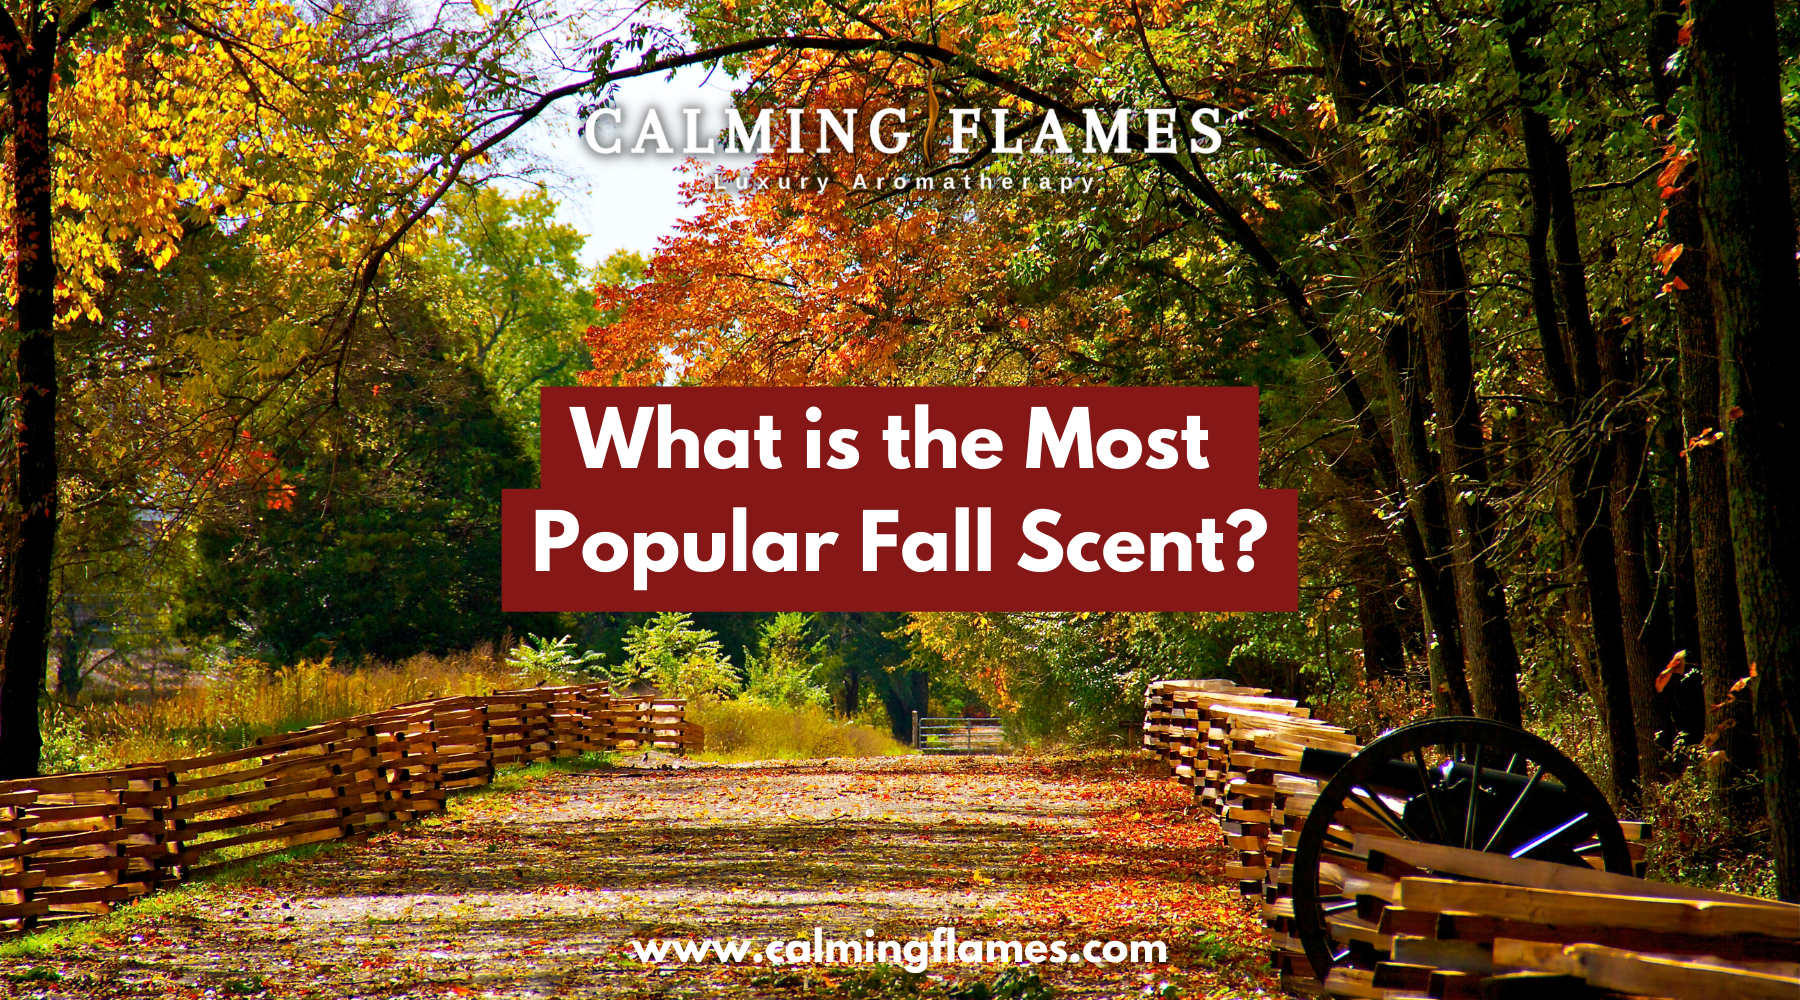 What is the most popular fall scent?